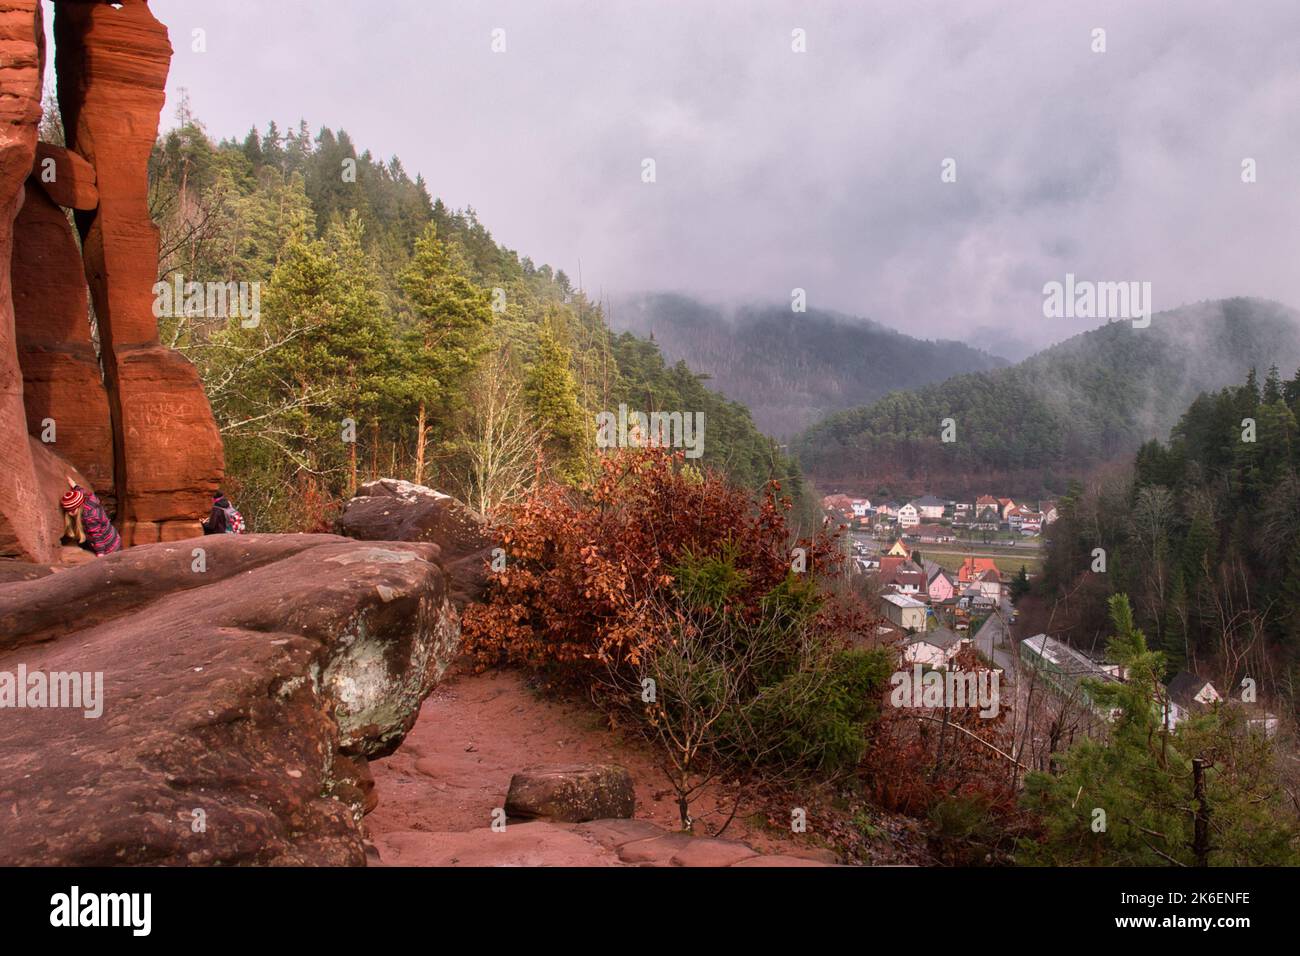 Hinterweidenthal, Germany - January 1, 2021: Kids climbing on red rocks at Devil's Table overlooking a small village in Germany on a foggy winter day. Stock Photo